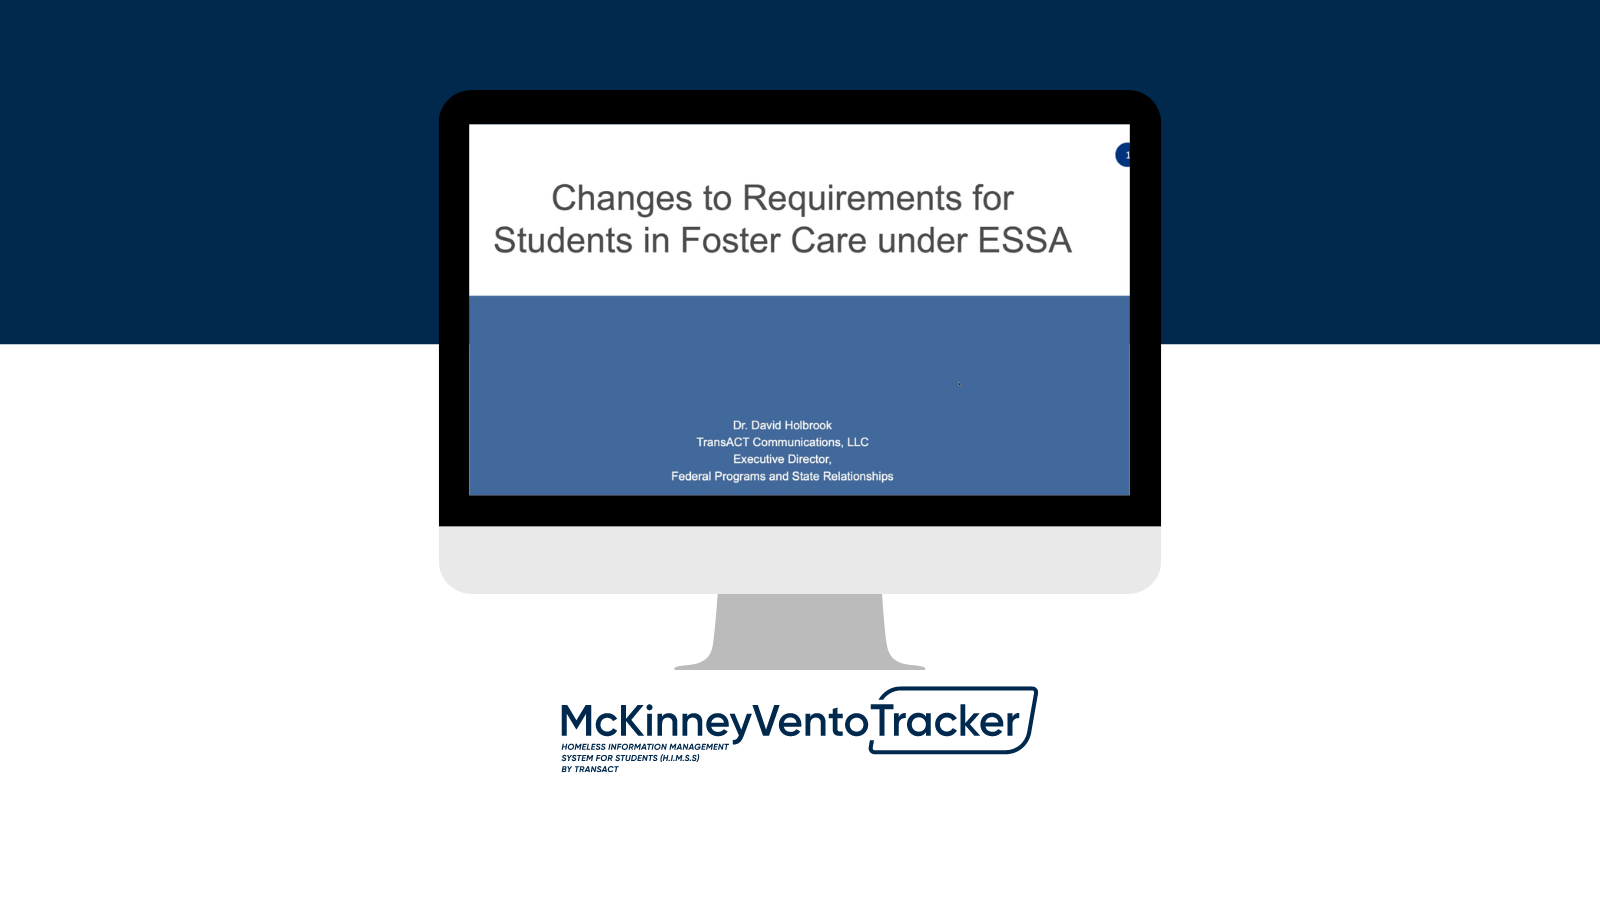 Changes in Educational Requirements for Students Experiencing Homelessness under ESSA